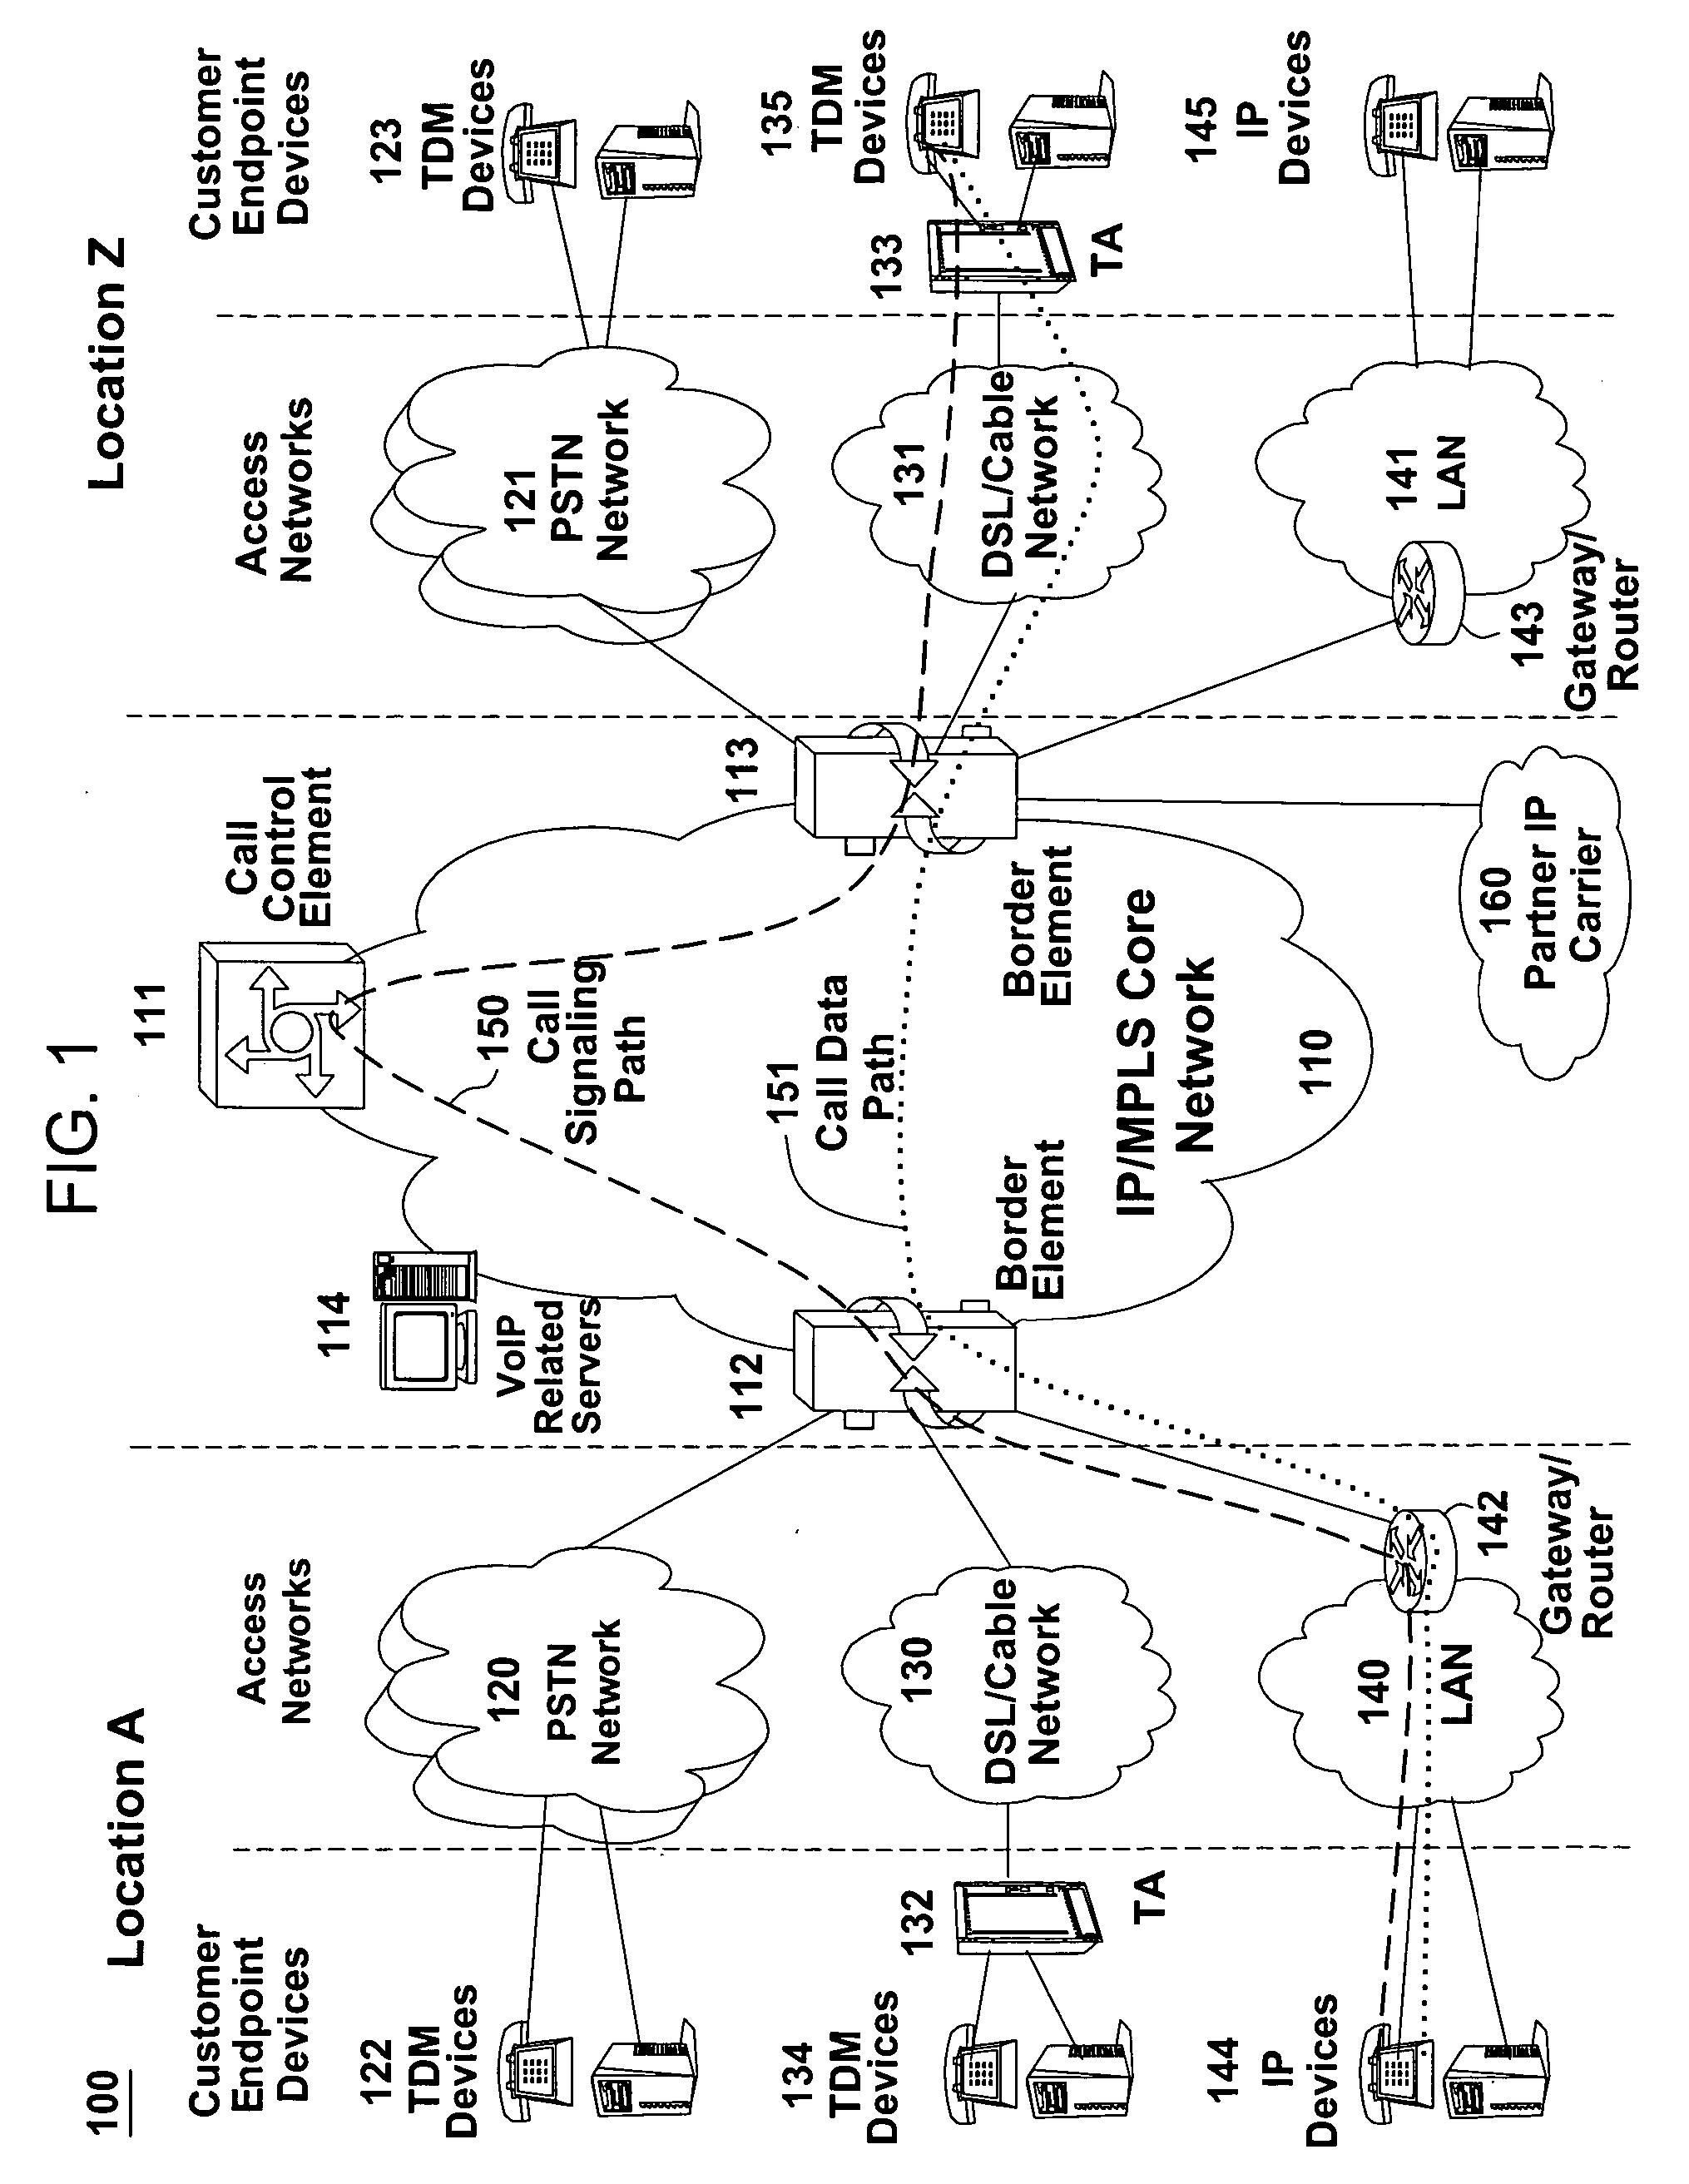 Method and apparatus for providing network announcements about service impairments